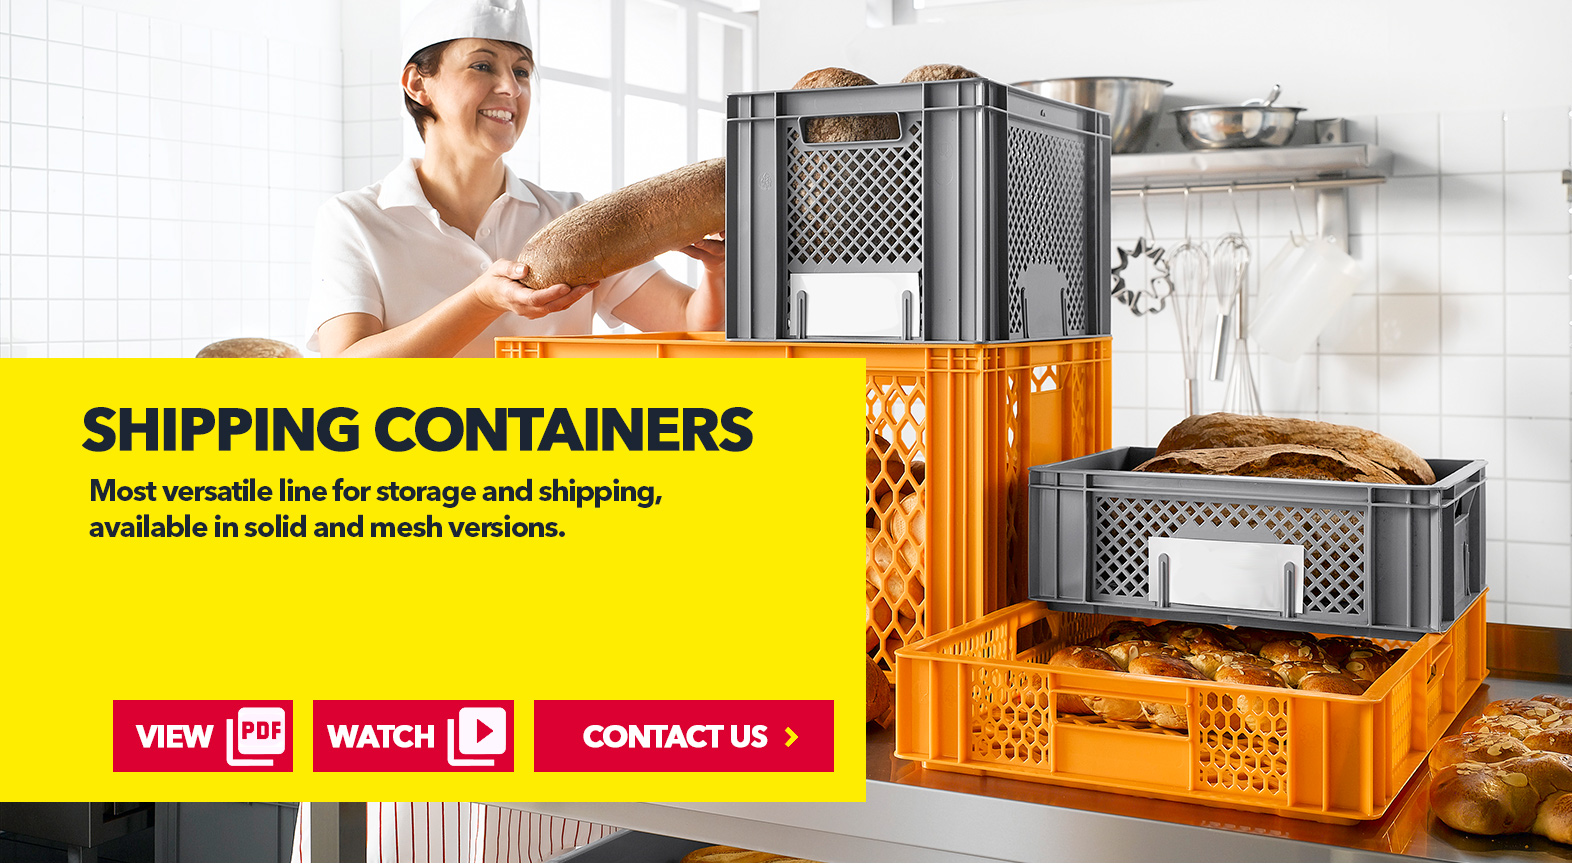 Reusable Shipping Containers by SSI Schaefer USA Download Guide, Watch Video, Contact Us. www.chaefershelving.com